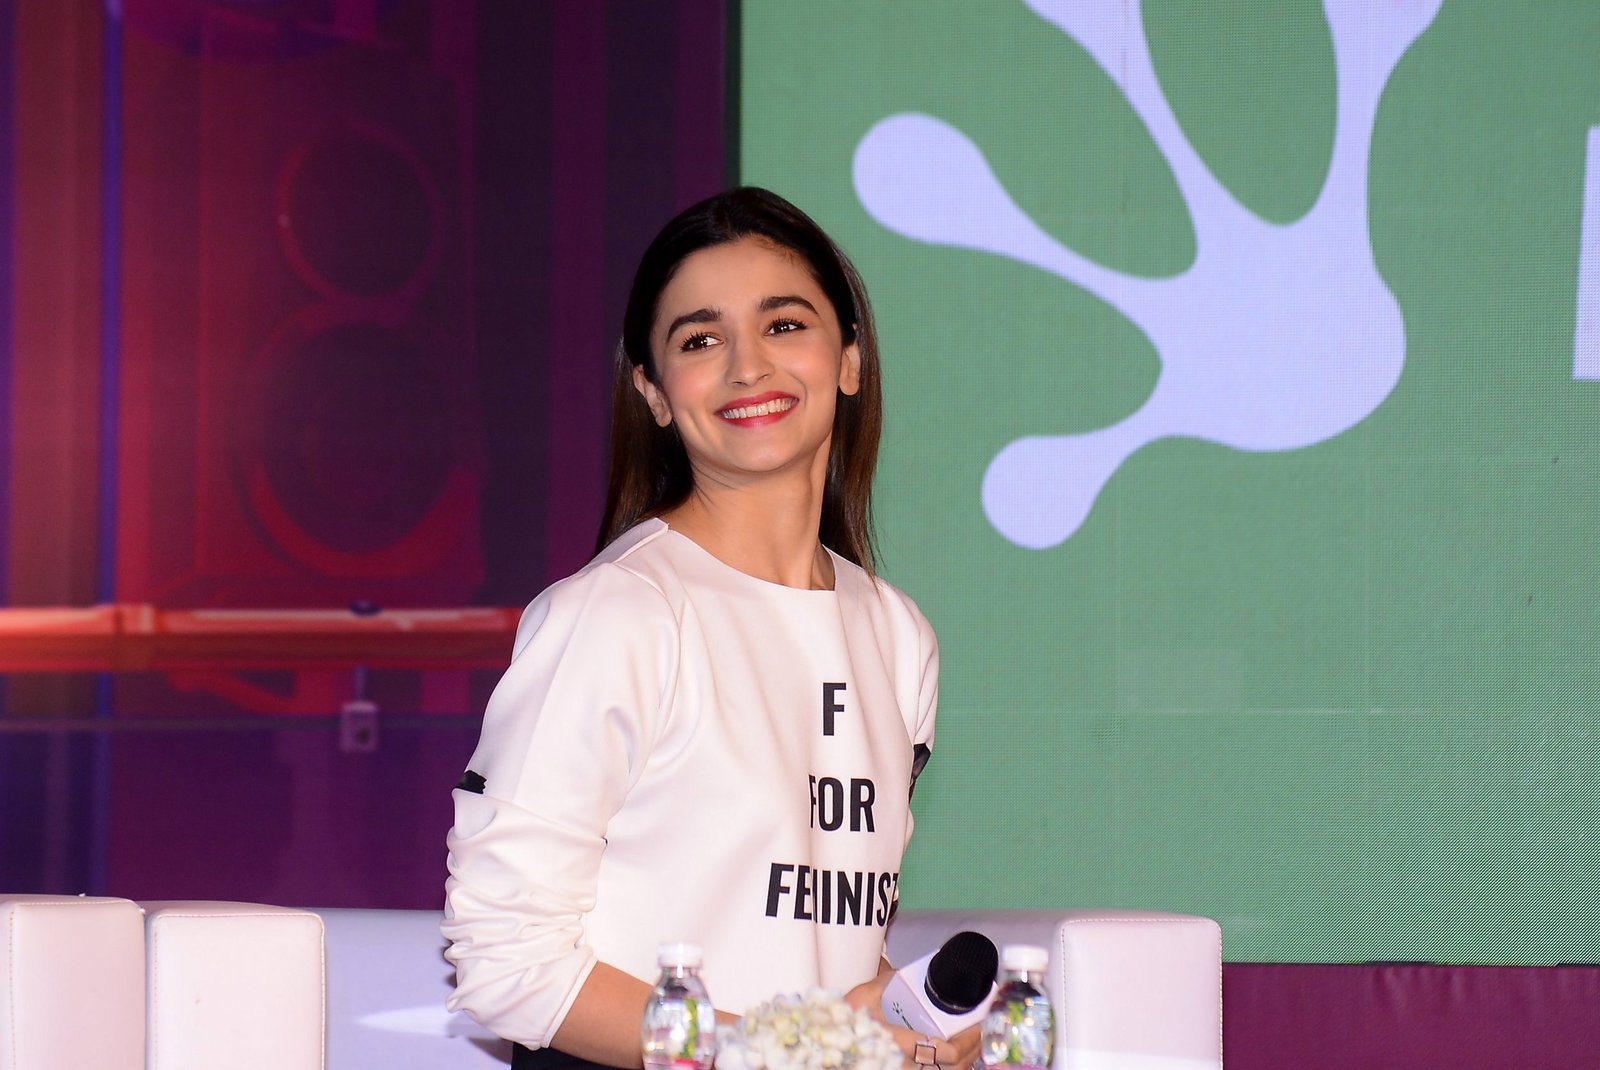 Alia Bhatt during the launch of Life Sim Experiential Game Photos | Picture 1485219